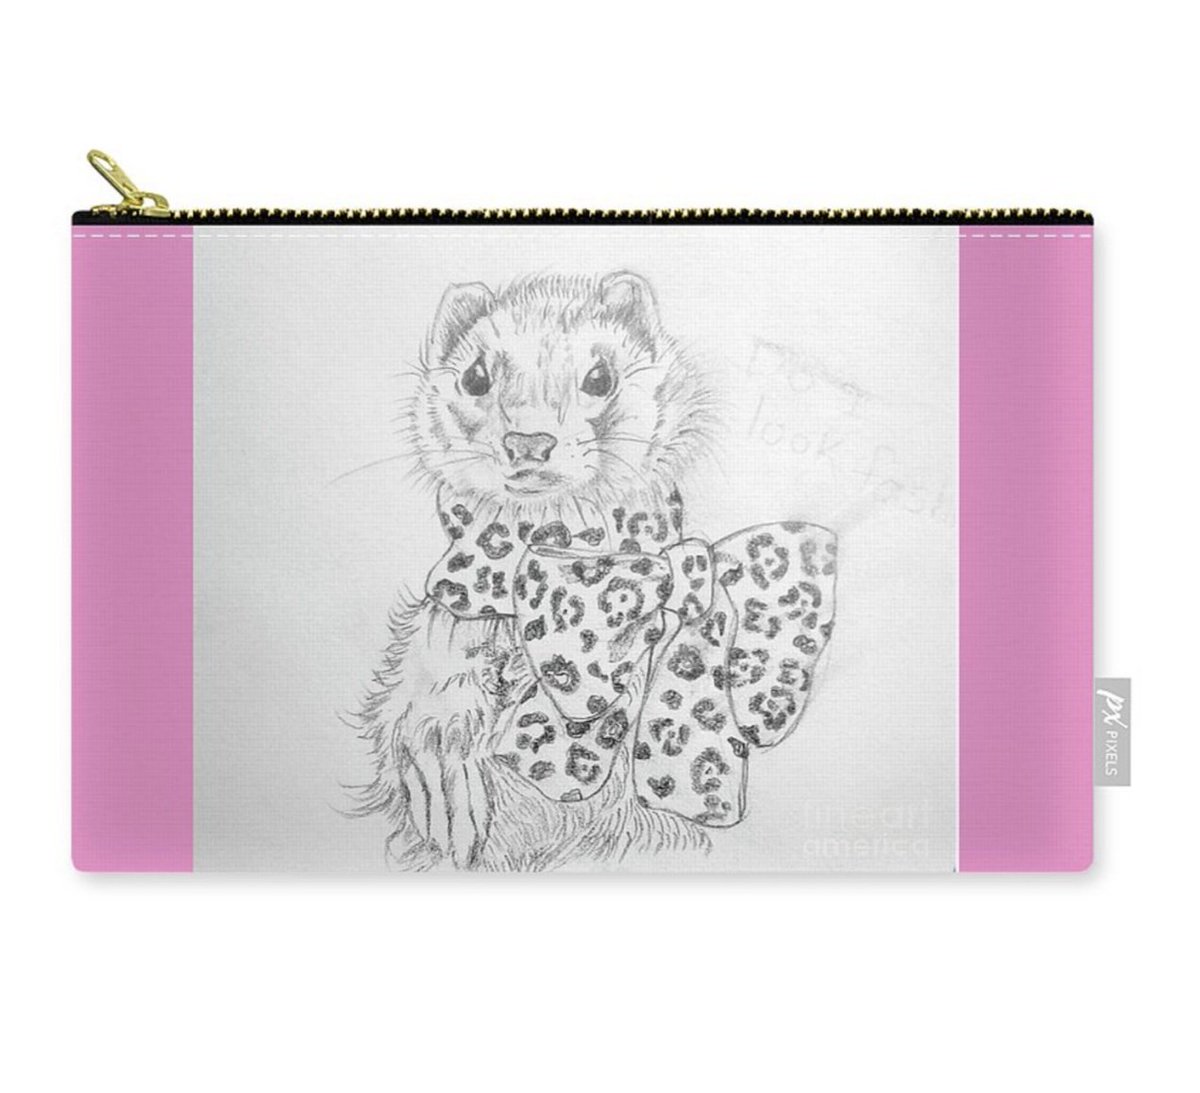 Fashionable Ferret Carry-All Pink Trim Pouch 
You select the trim color you like 💟🌺🌼fineartamerica.com/products/fashi… #ferret #fashion #tween #animalart #totallycute #pink #ferrets   #tweenfashion #animalprint #leopardprint   #makeup #makeupbag #clutch #tweenstyle #pinkaccessories